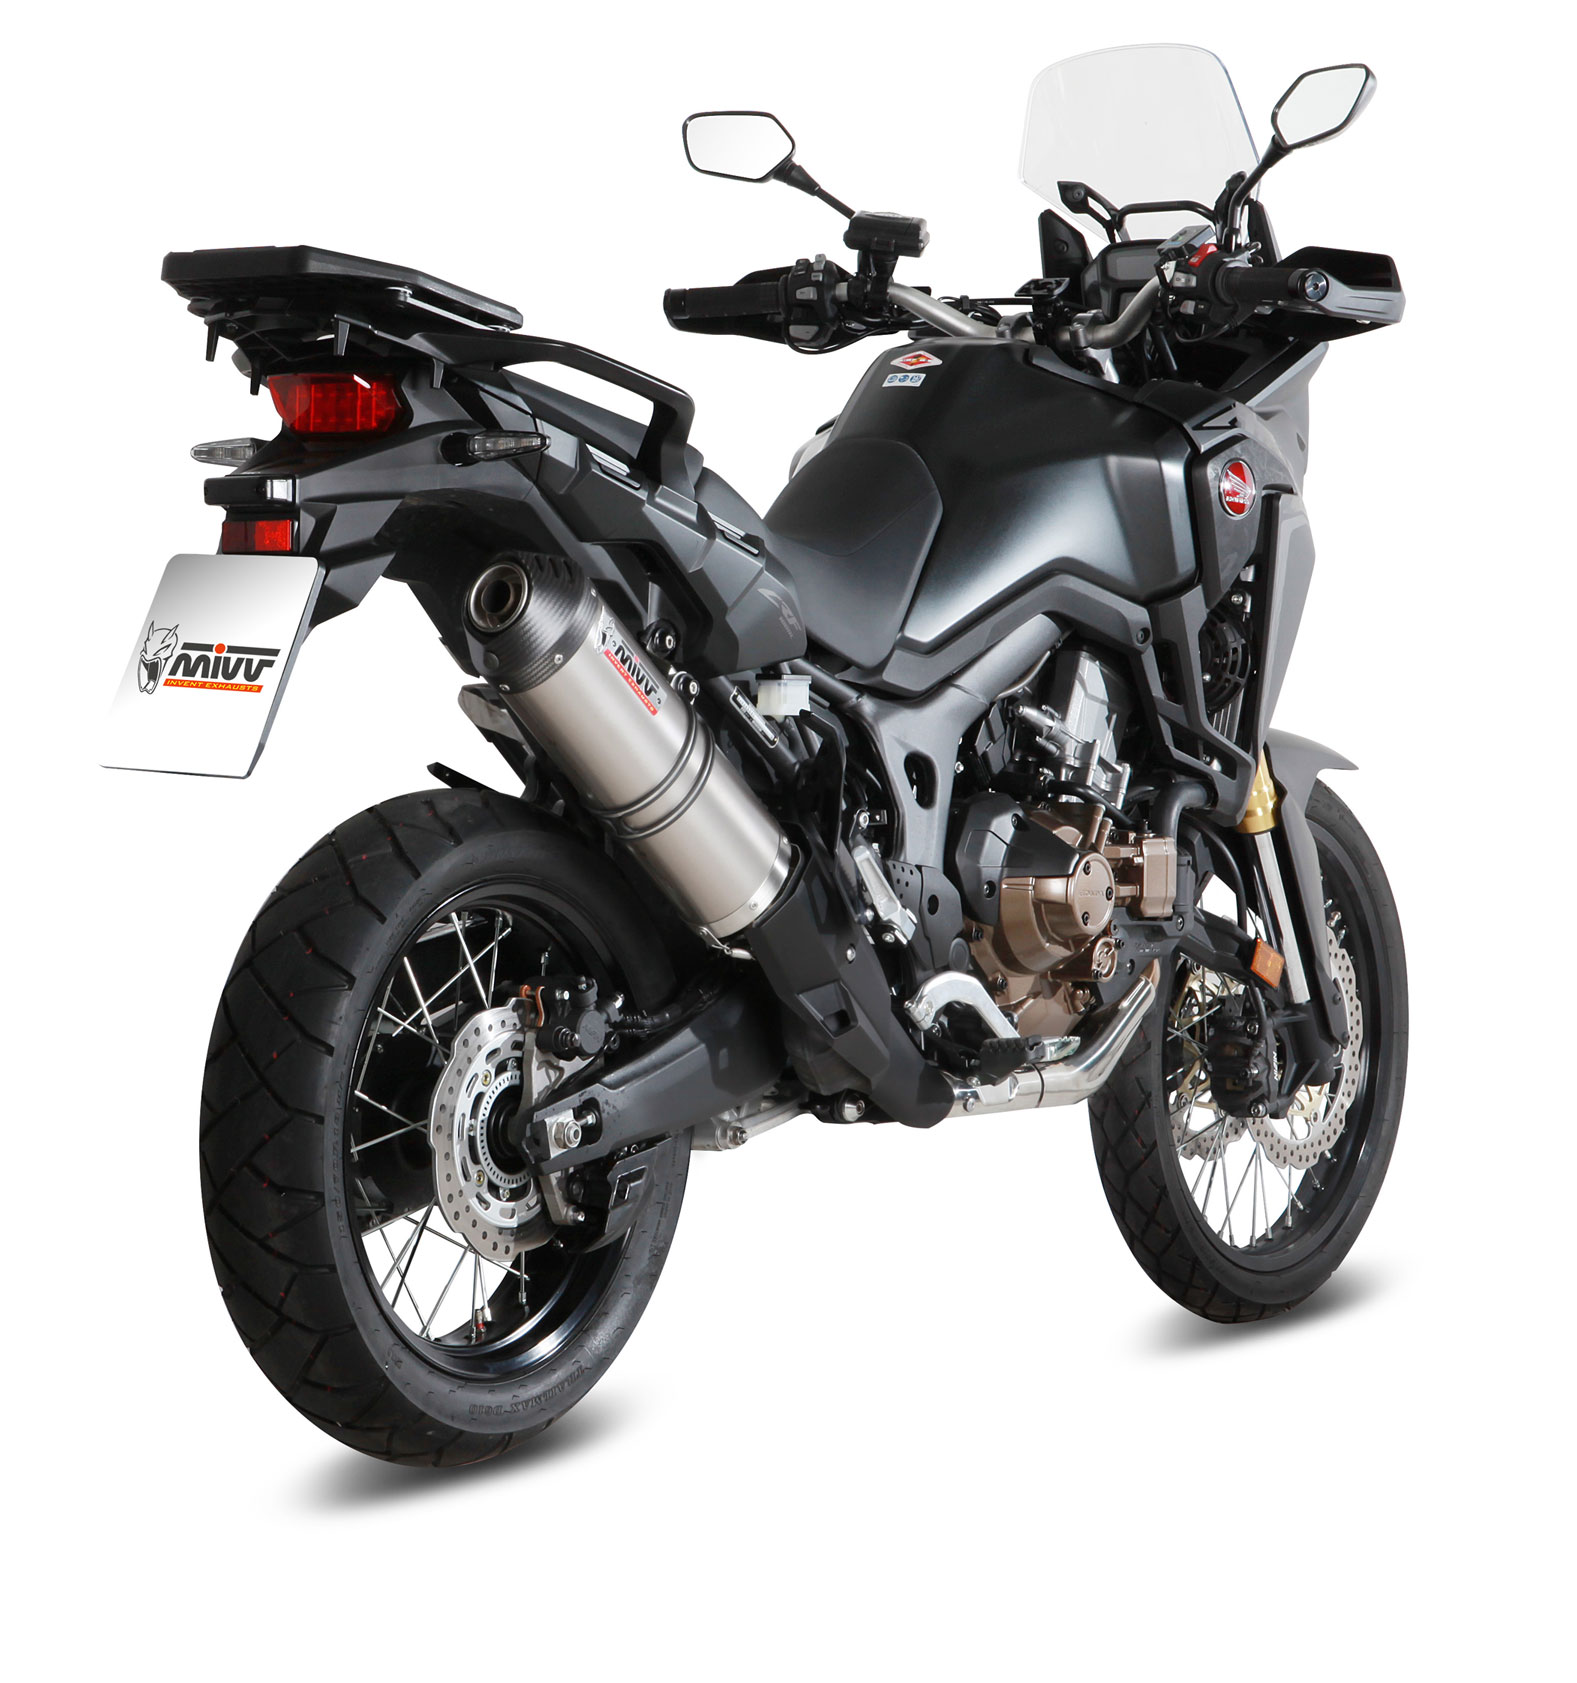 CRF1000L AfricaTwin with Mivv Oval 2